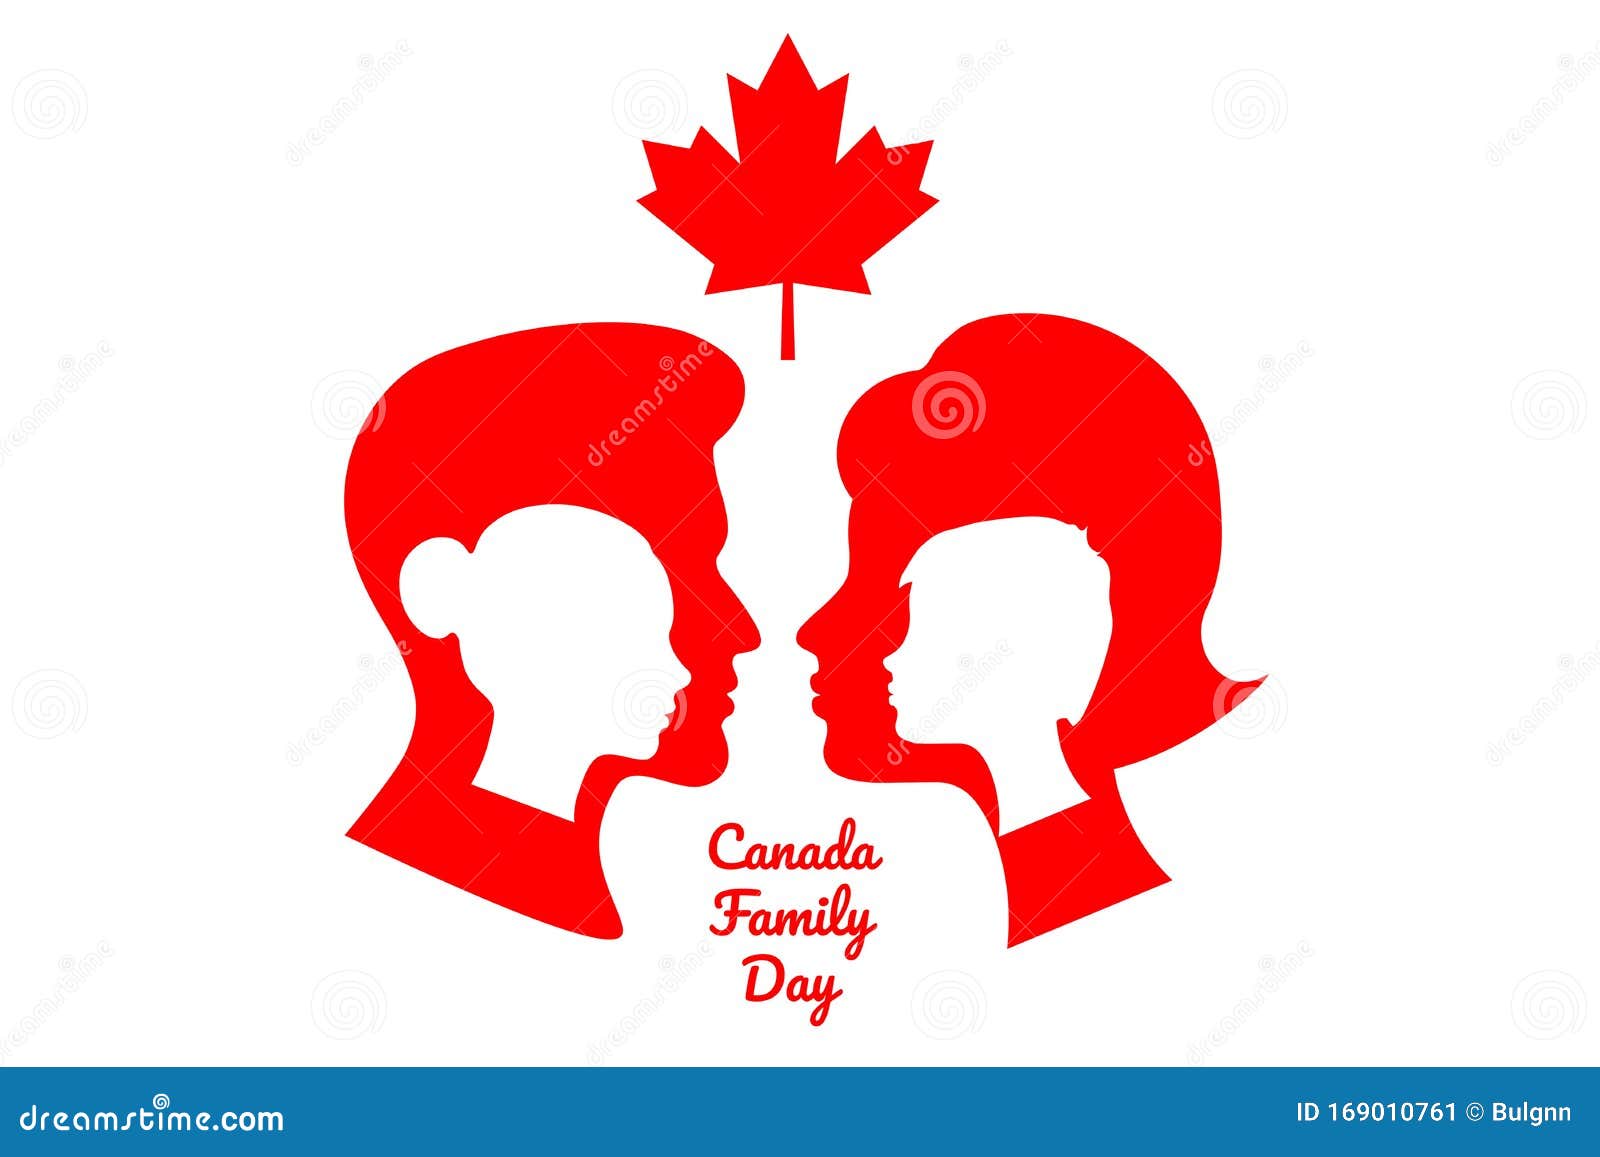 Concept of Family Day in Canada. Template for Background, Banner, Card